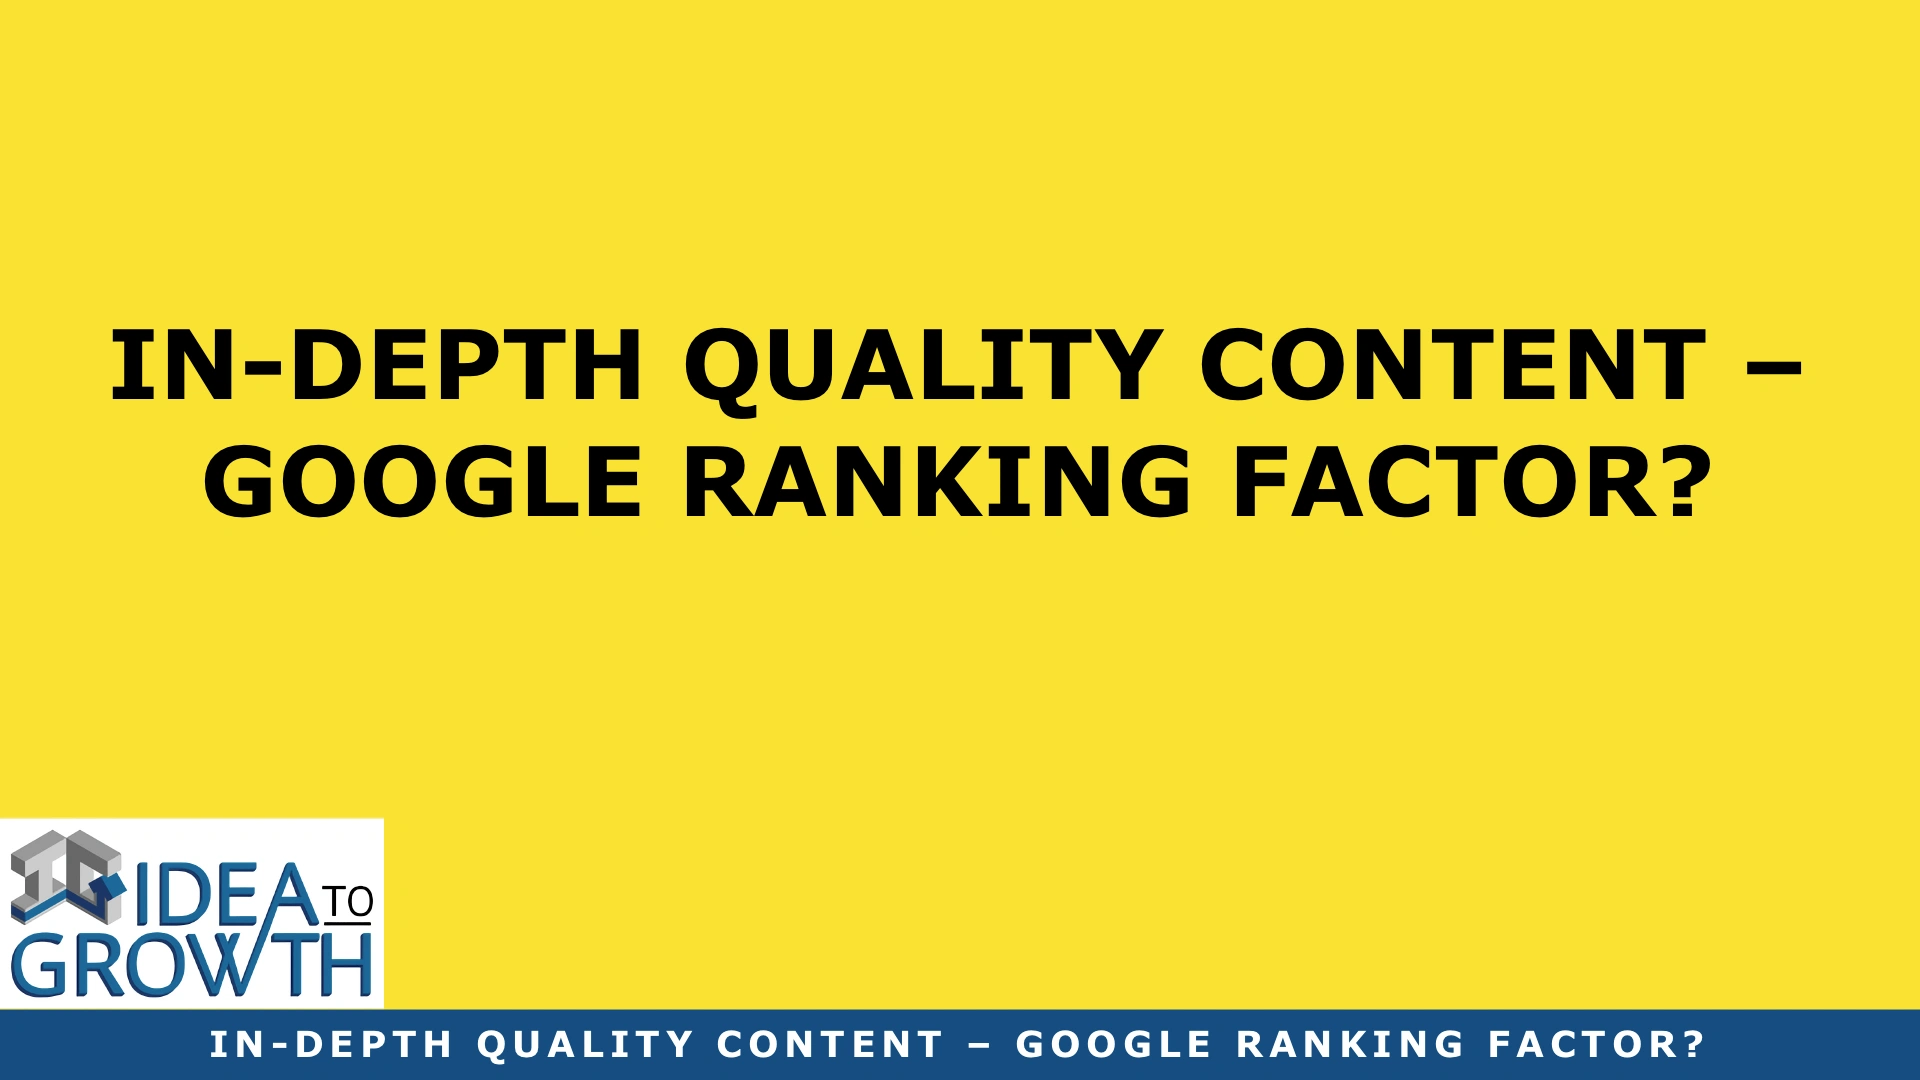 IN-DEPTH QUALITY CONTENT – GOOGLE RANKING FACTOR?